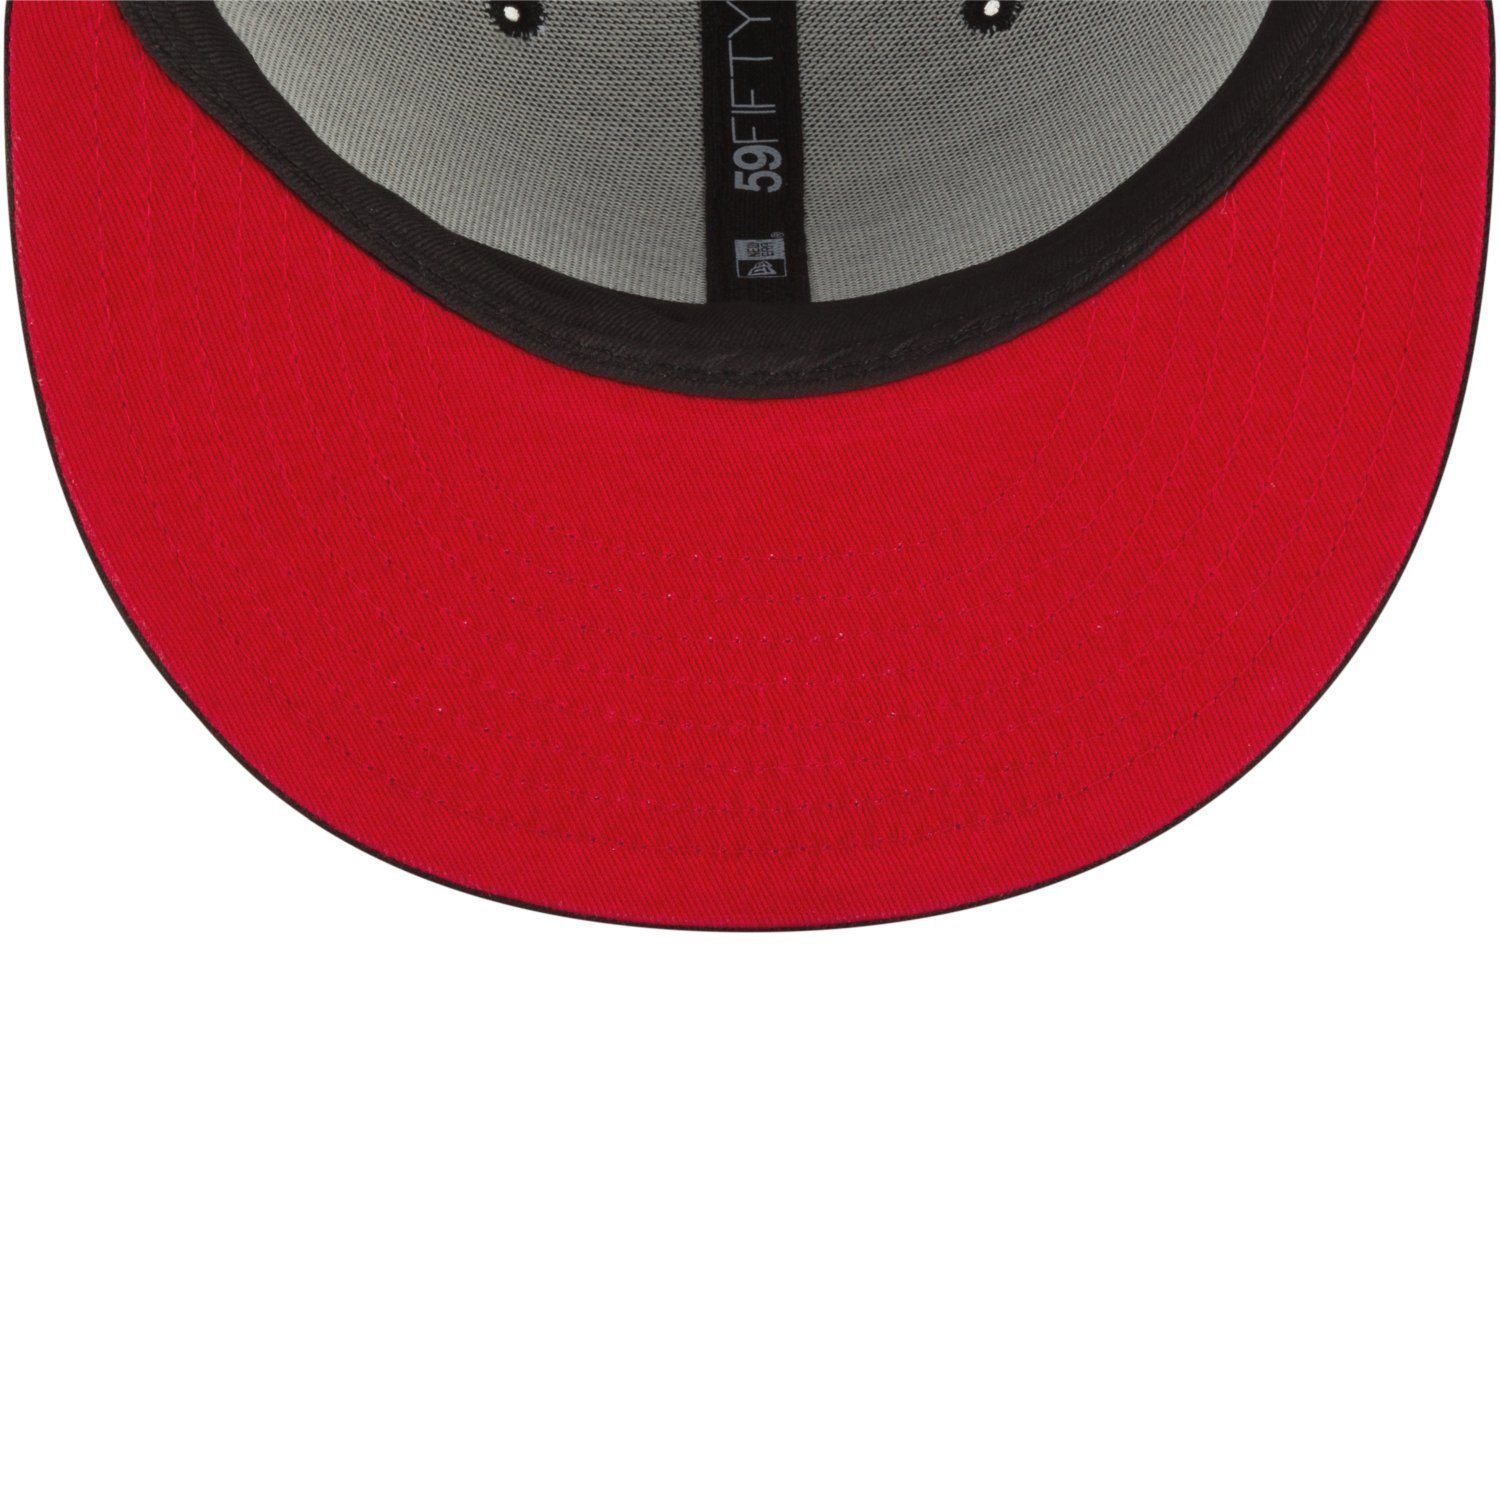 LOGO New STATE San Era Francisco Teams NFL Cap Fitted 59Fifty 49ers